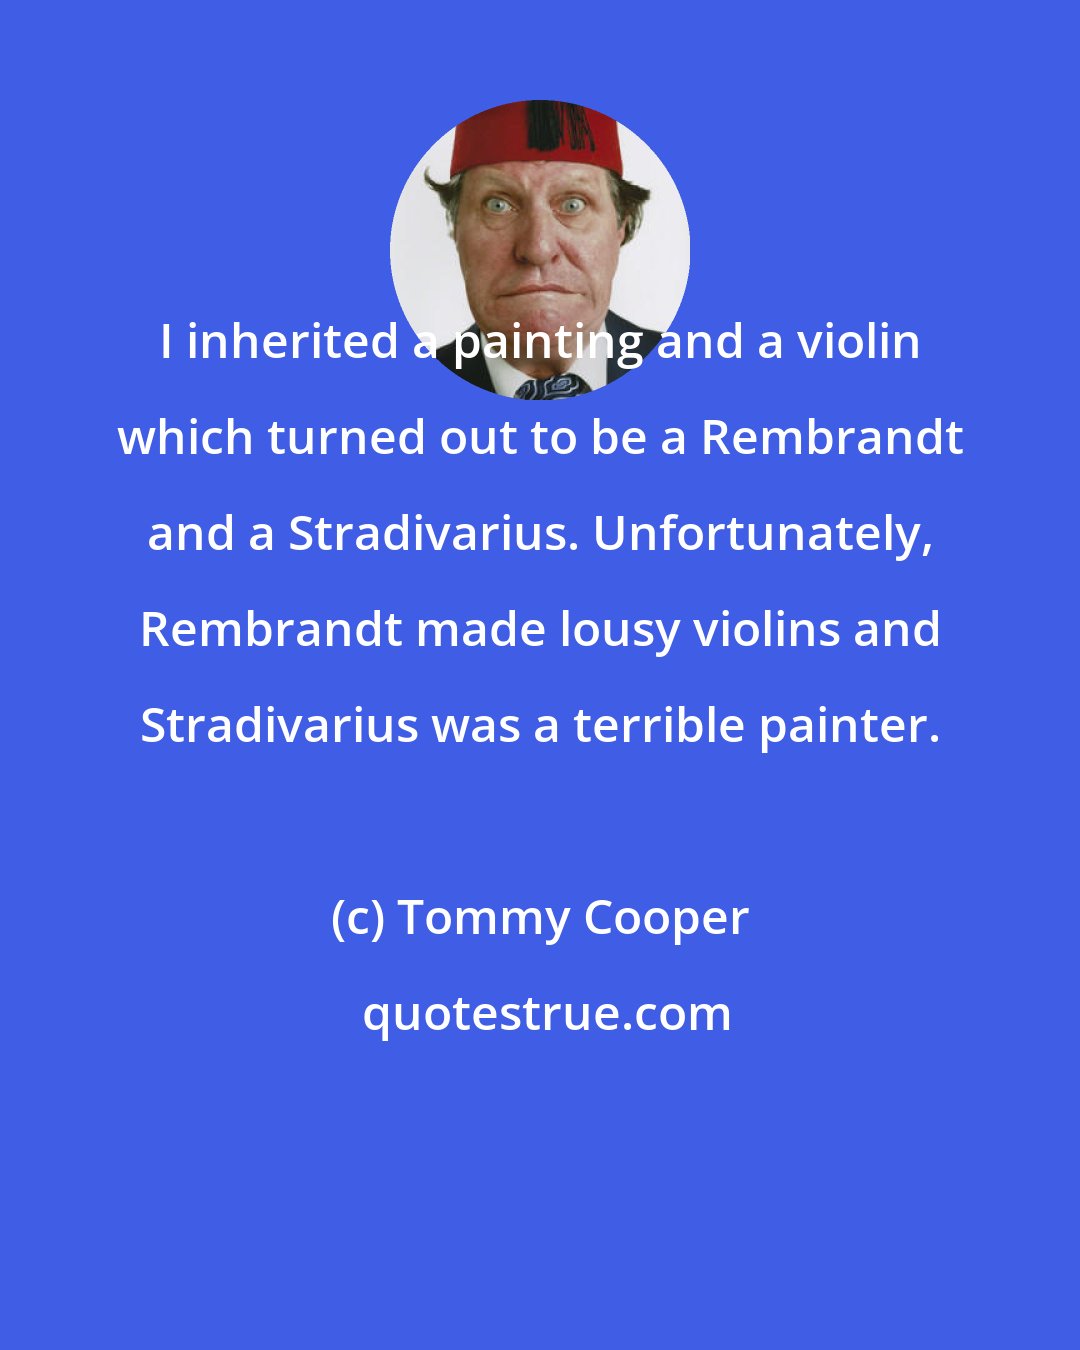 Tommy Cooper: I inherited a painting and a violin which turned out to be a Rembrandt and a Stradivarius. Unfortunately, Rembrandt made lousy violins and Stradivarius was a terrible painter.